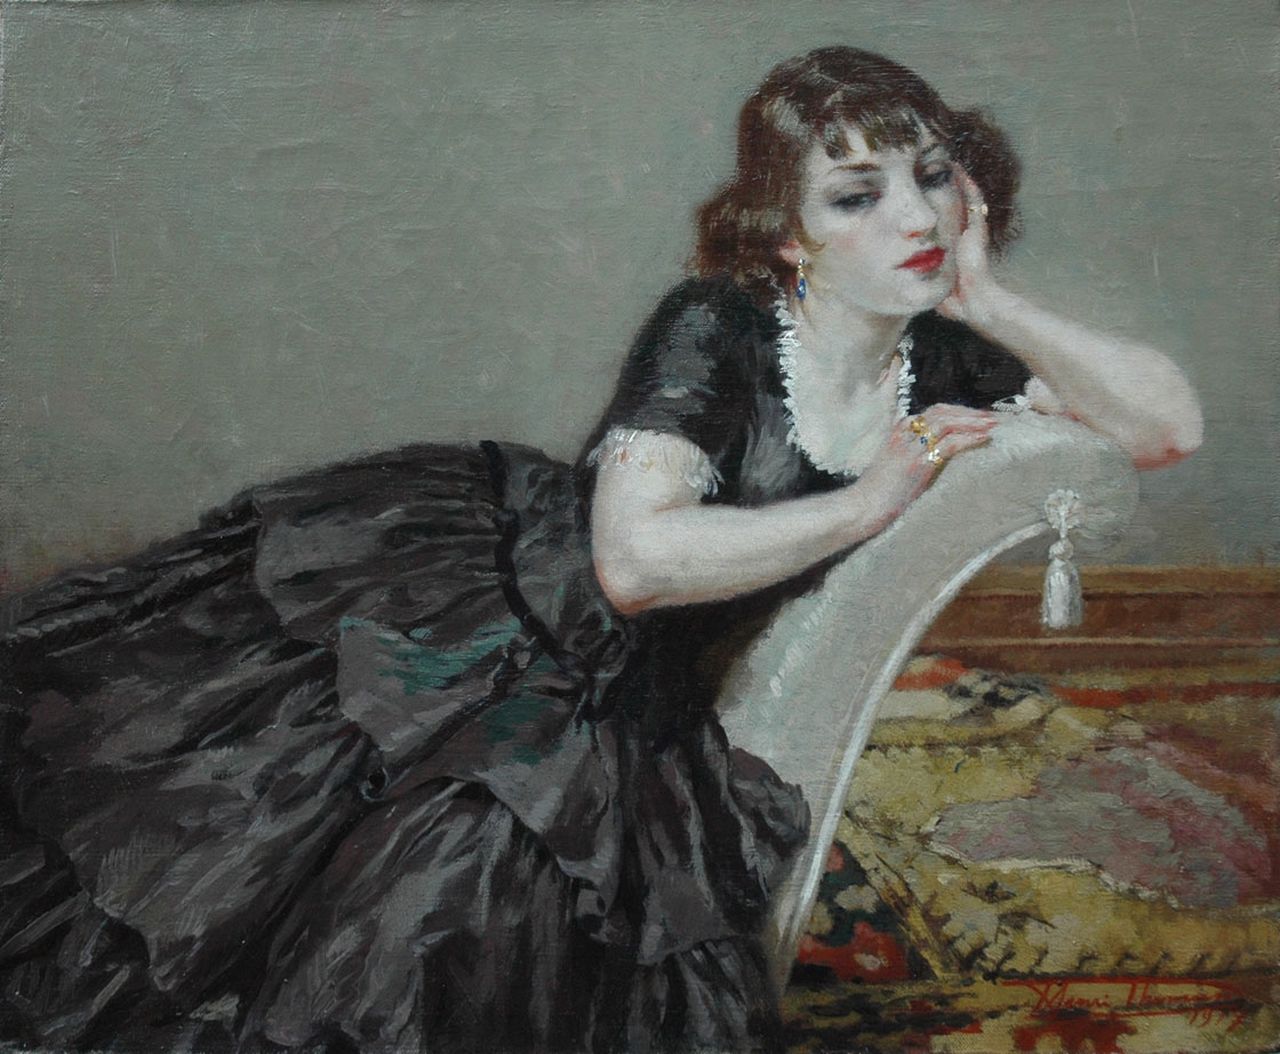 Thomas H.J.  | Henri Joseph Thomas, Daydreaming, oil on canvas 50.3 x 60.4 cm, signed l.r. and dated 1917